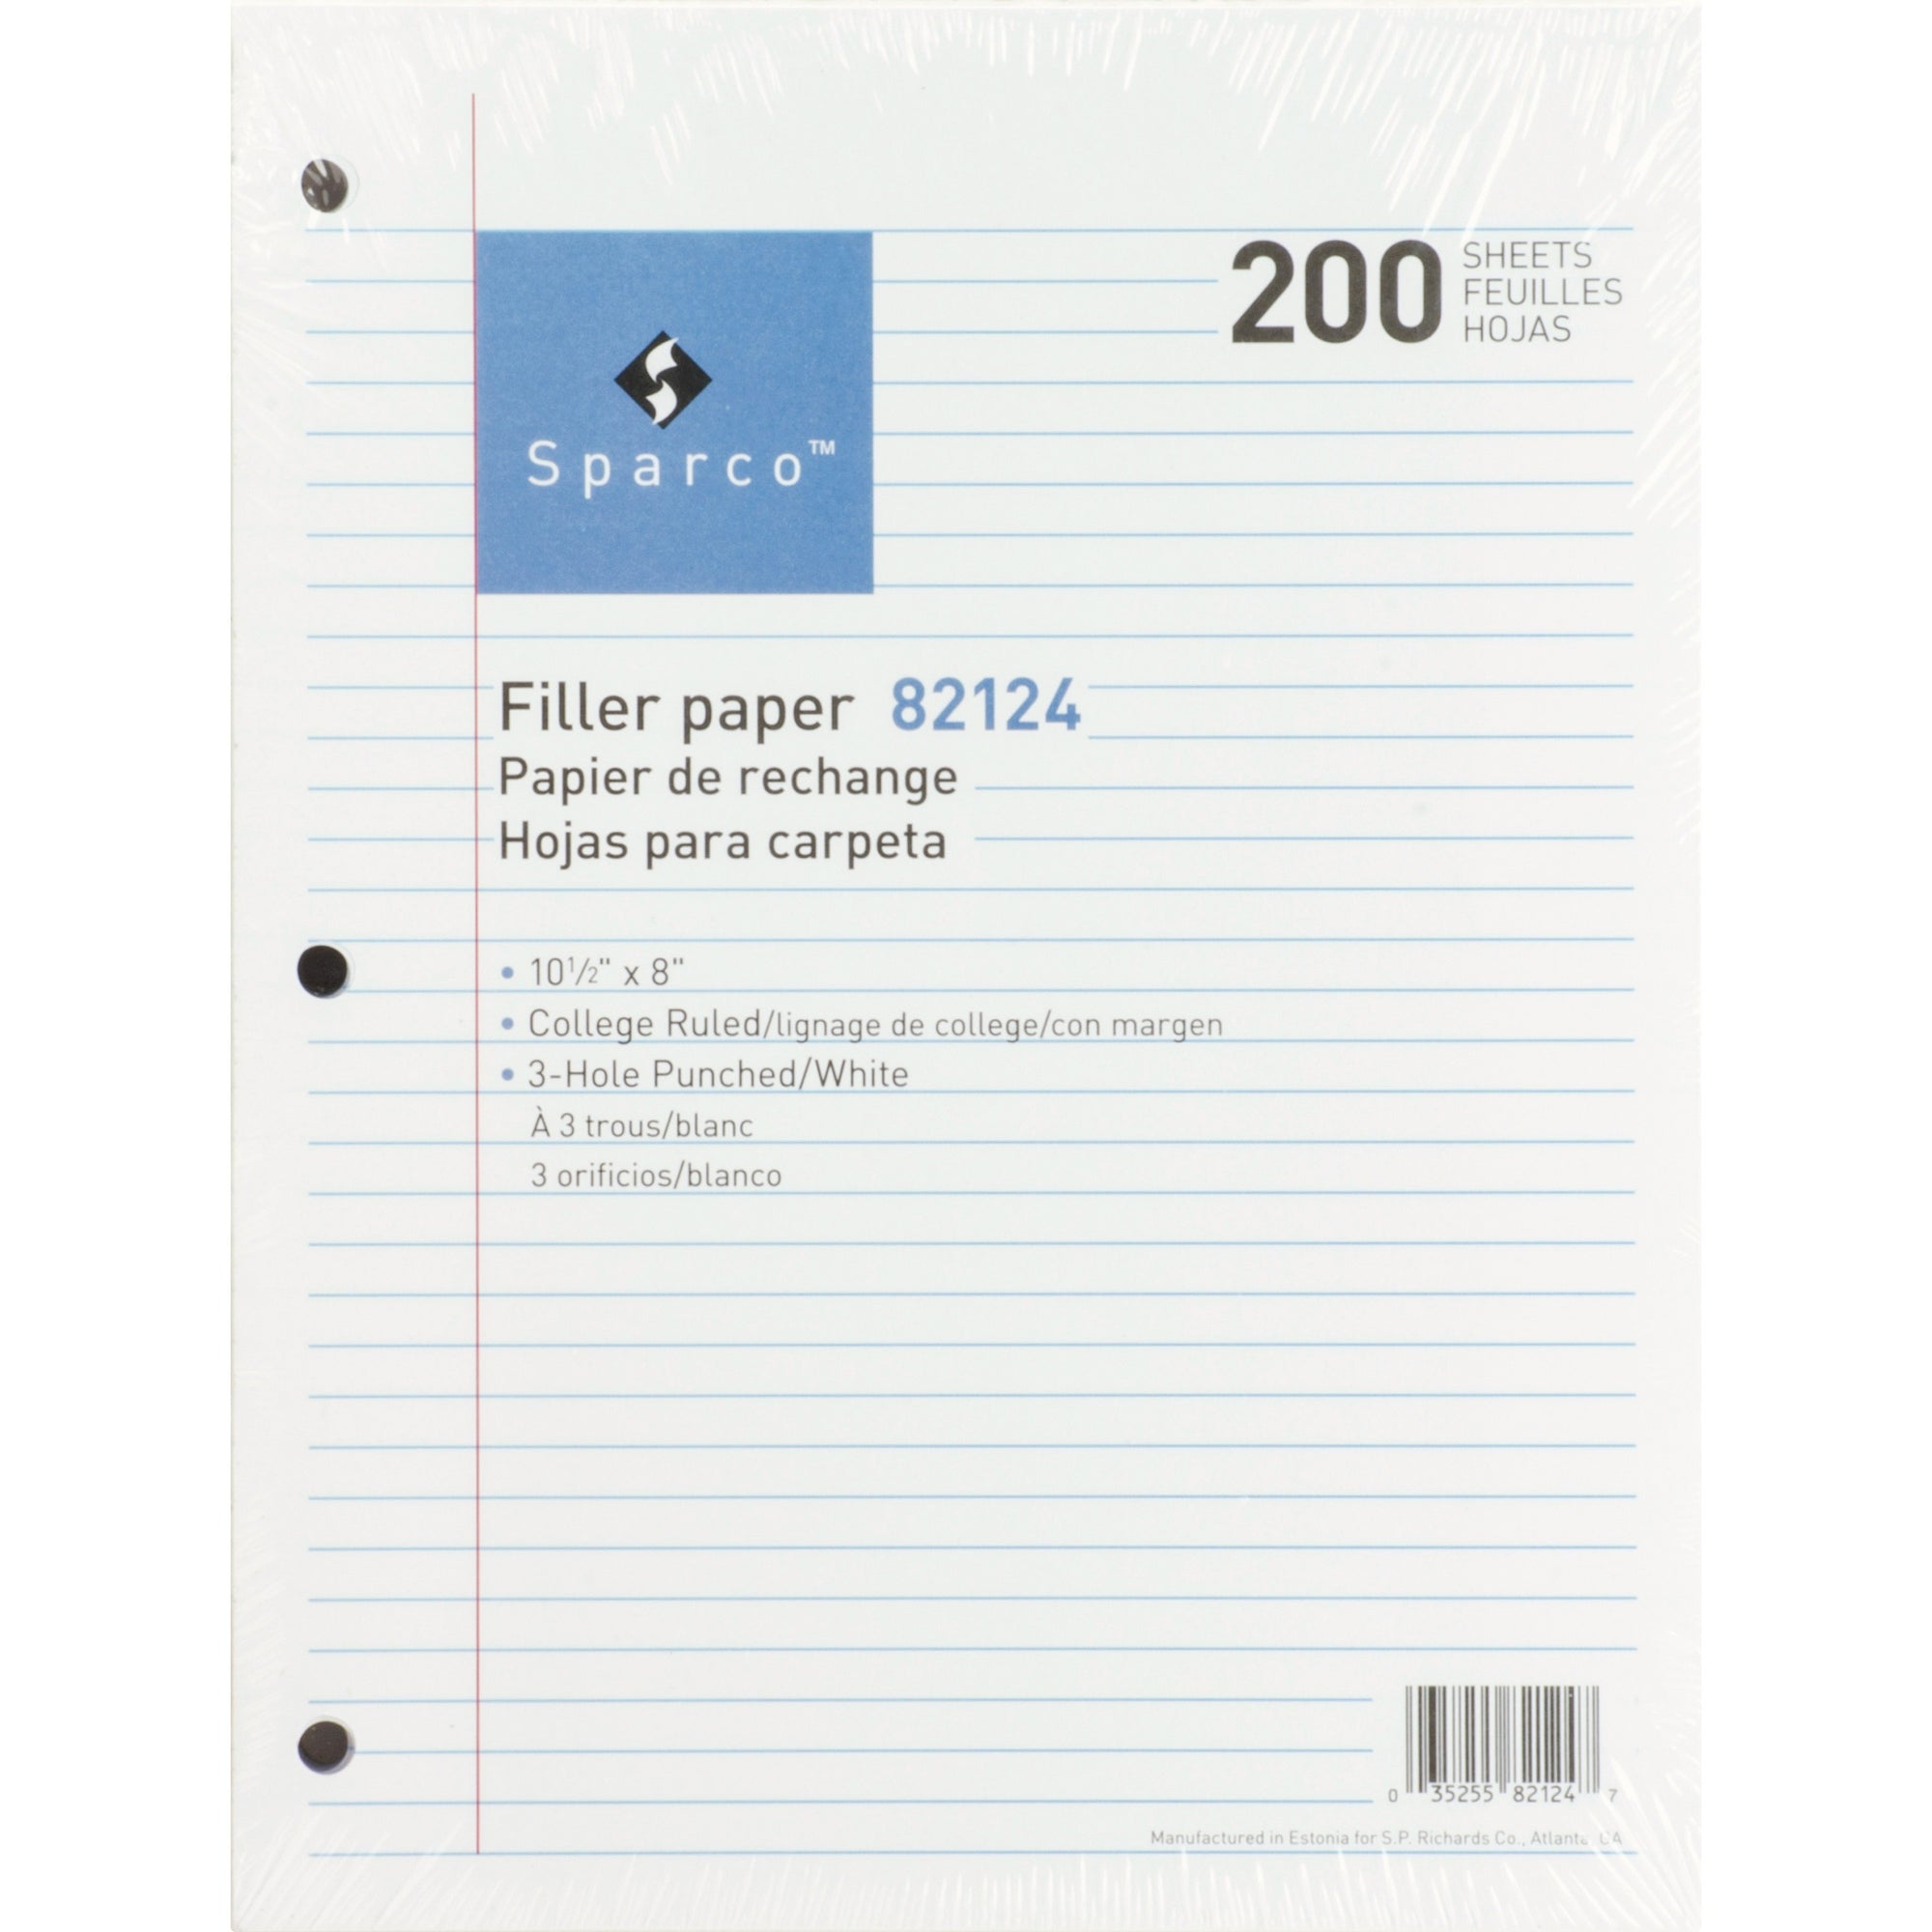 Looseleaf Paper, College Ruled, 200 Sheets